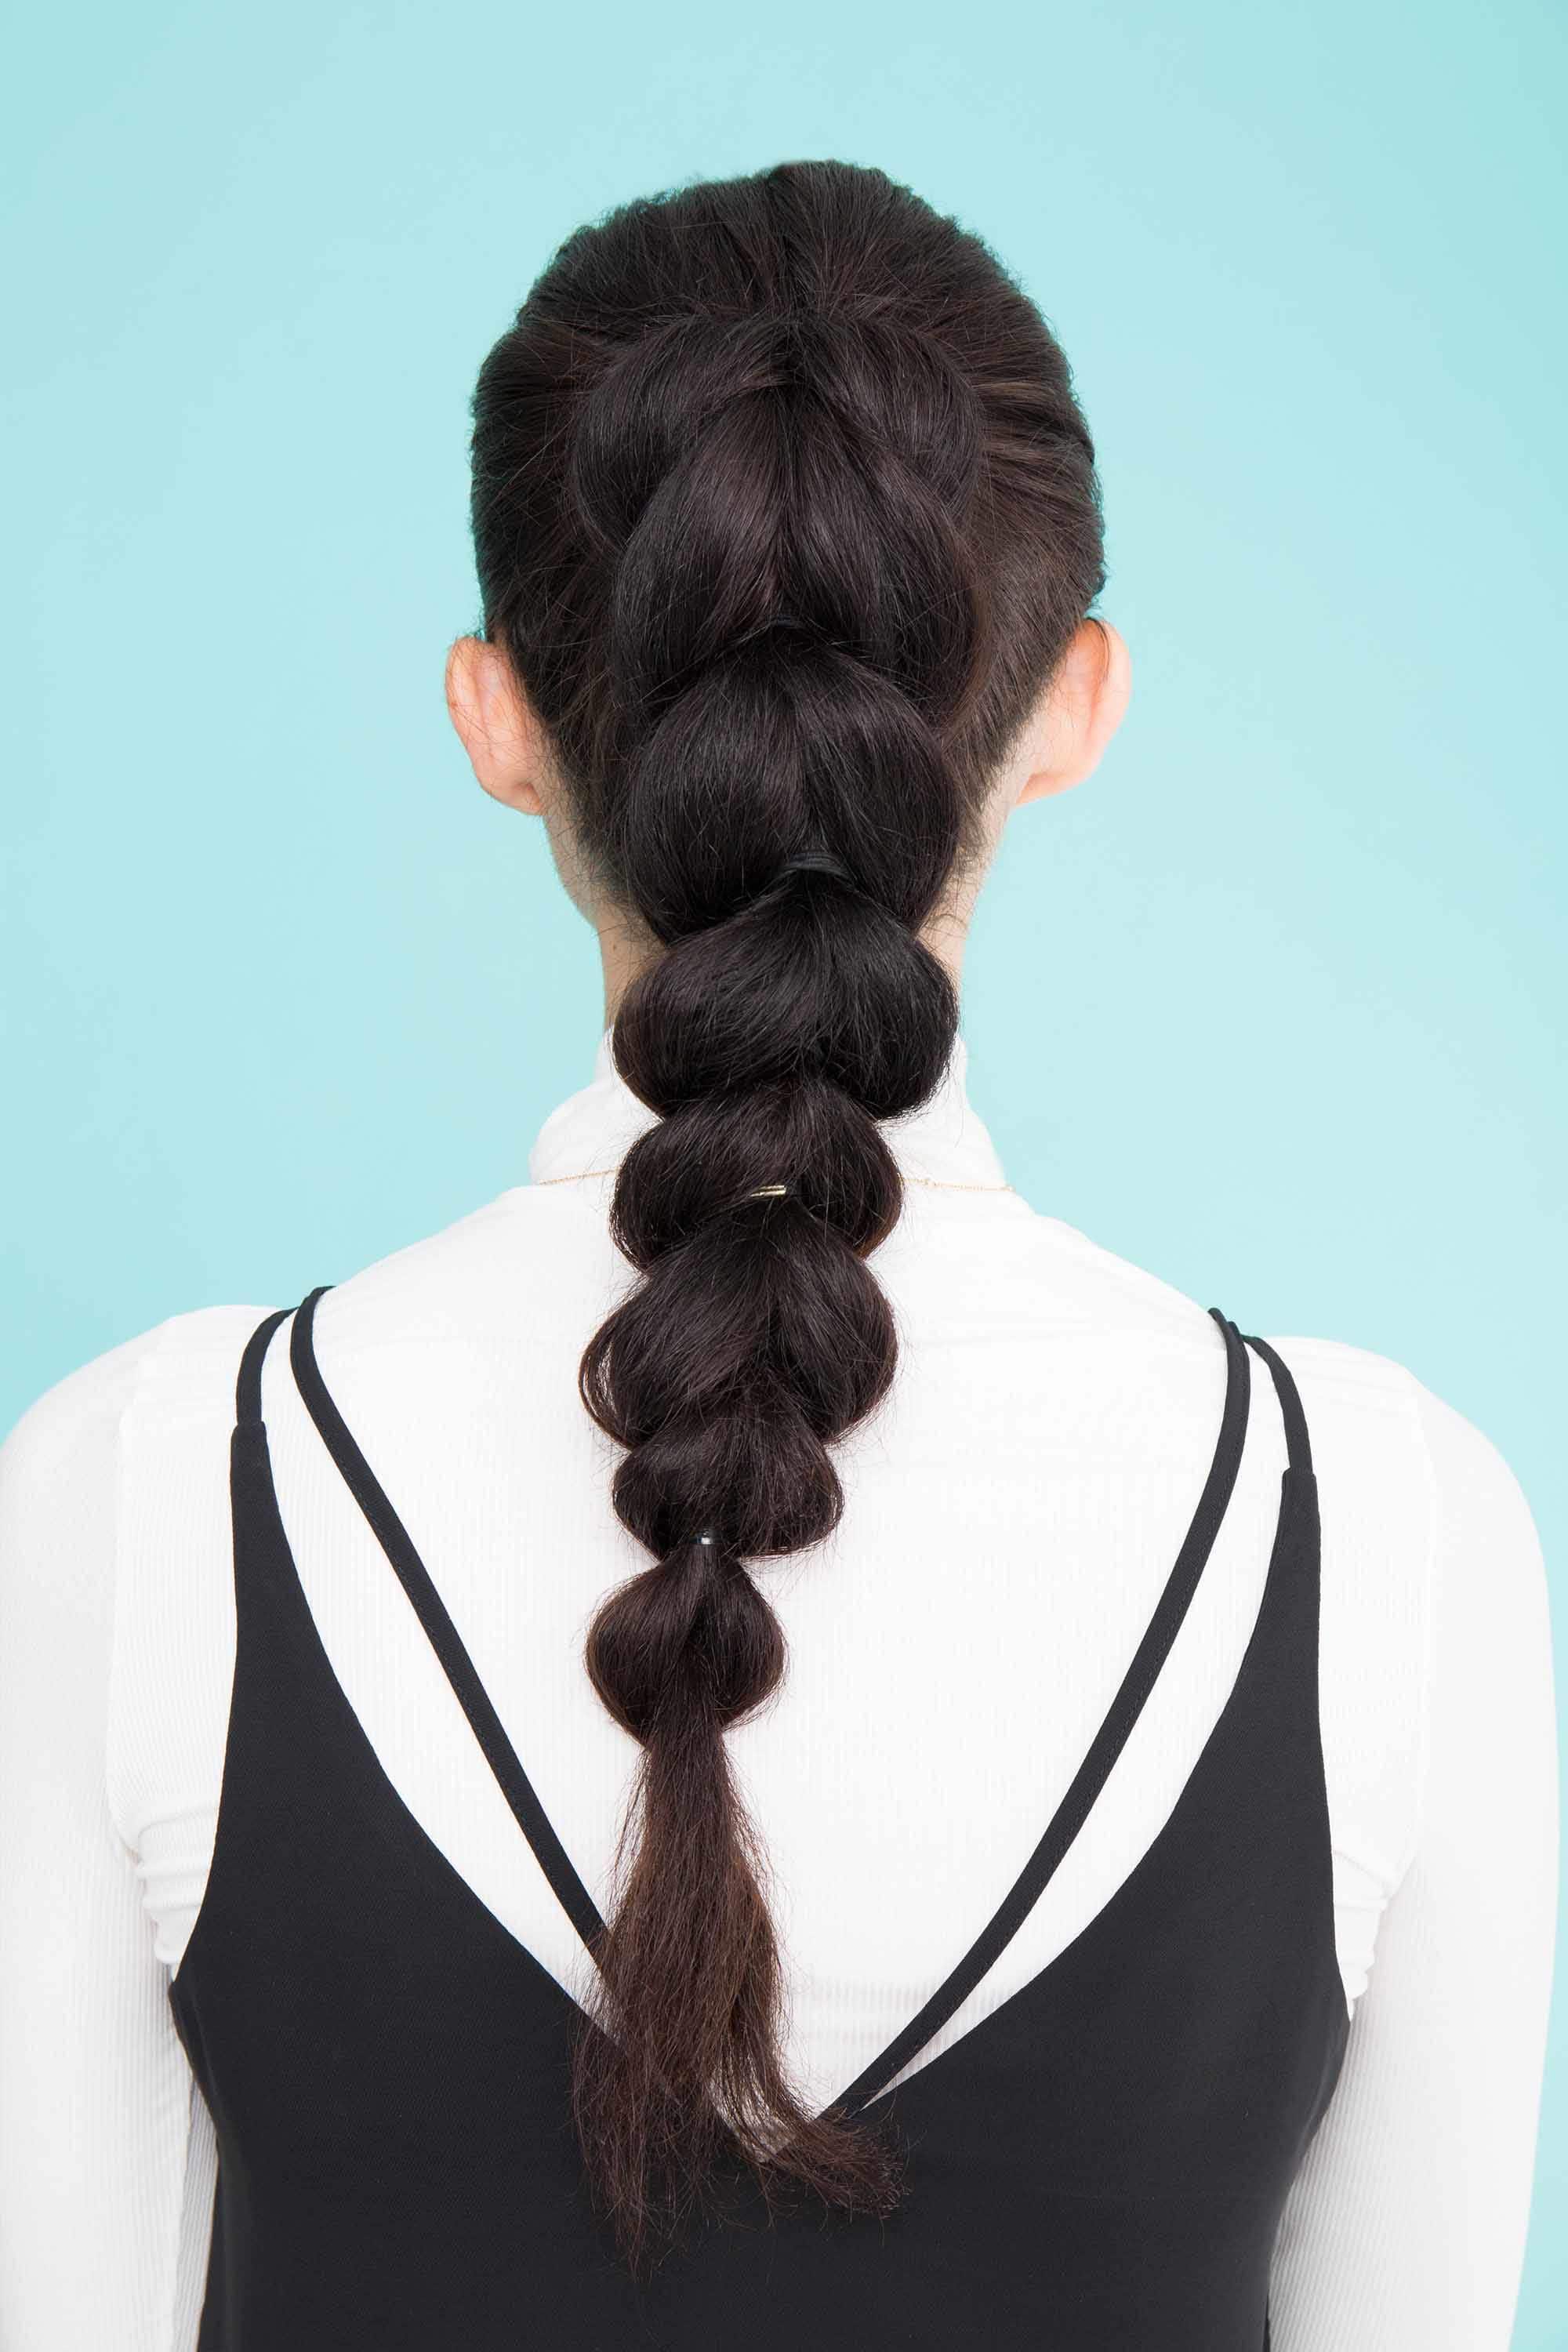 10 Ways Prom Hairstyles 2018 For Women -A Quick Hair Guide 6